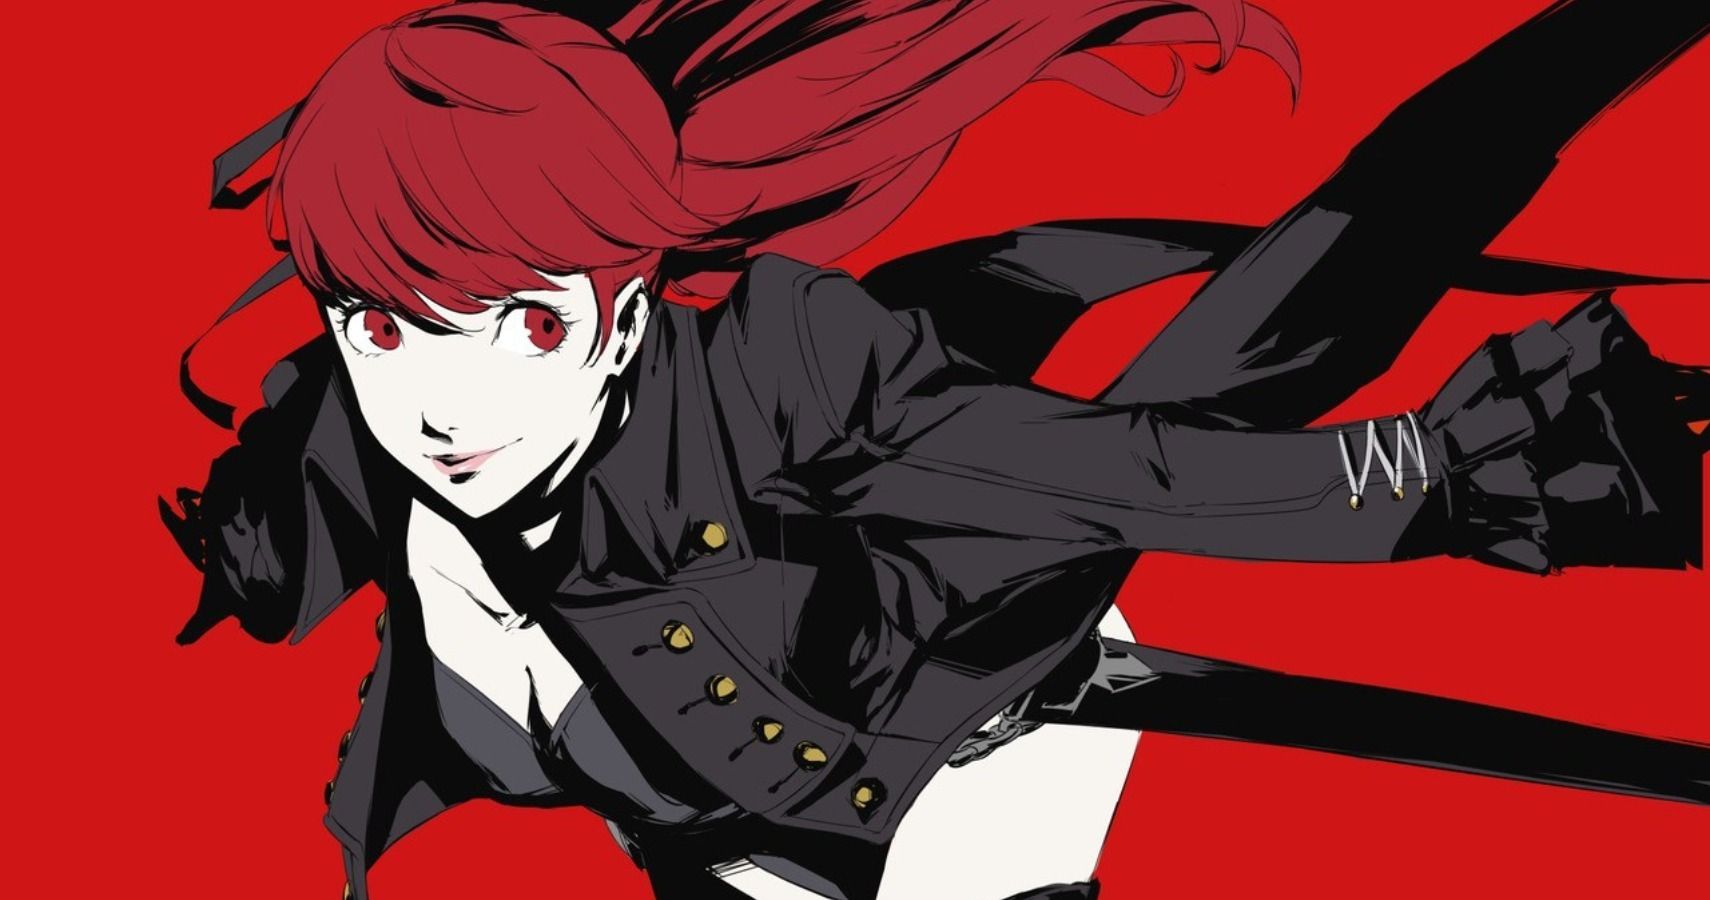 Several International PSN Stores List Persona 5 Royal For February 2020